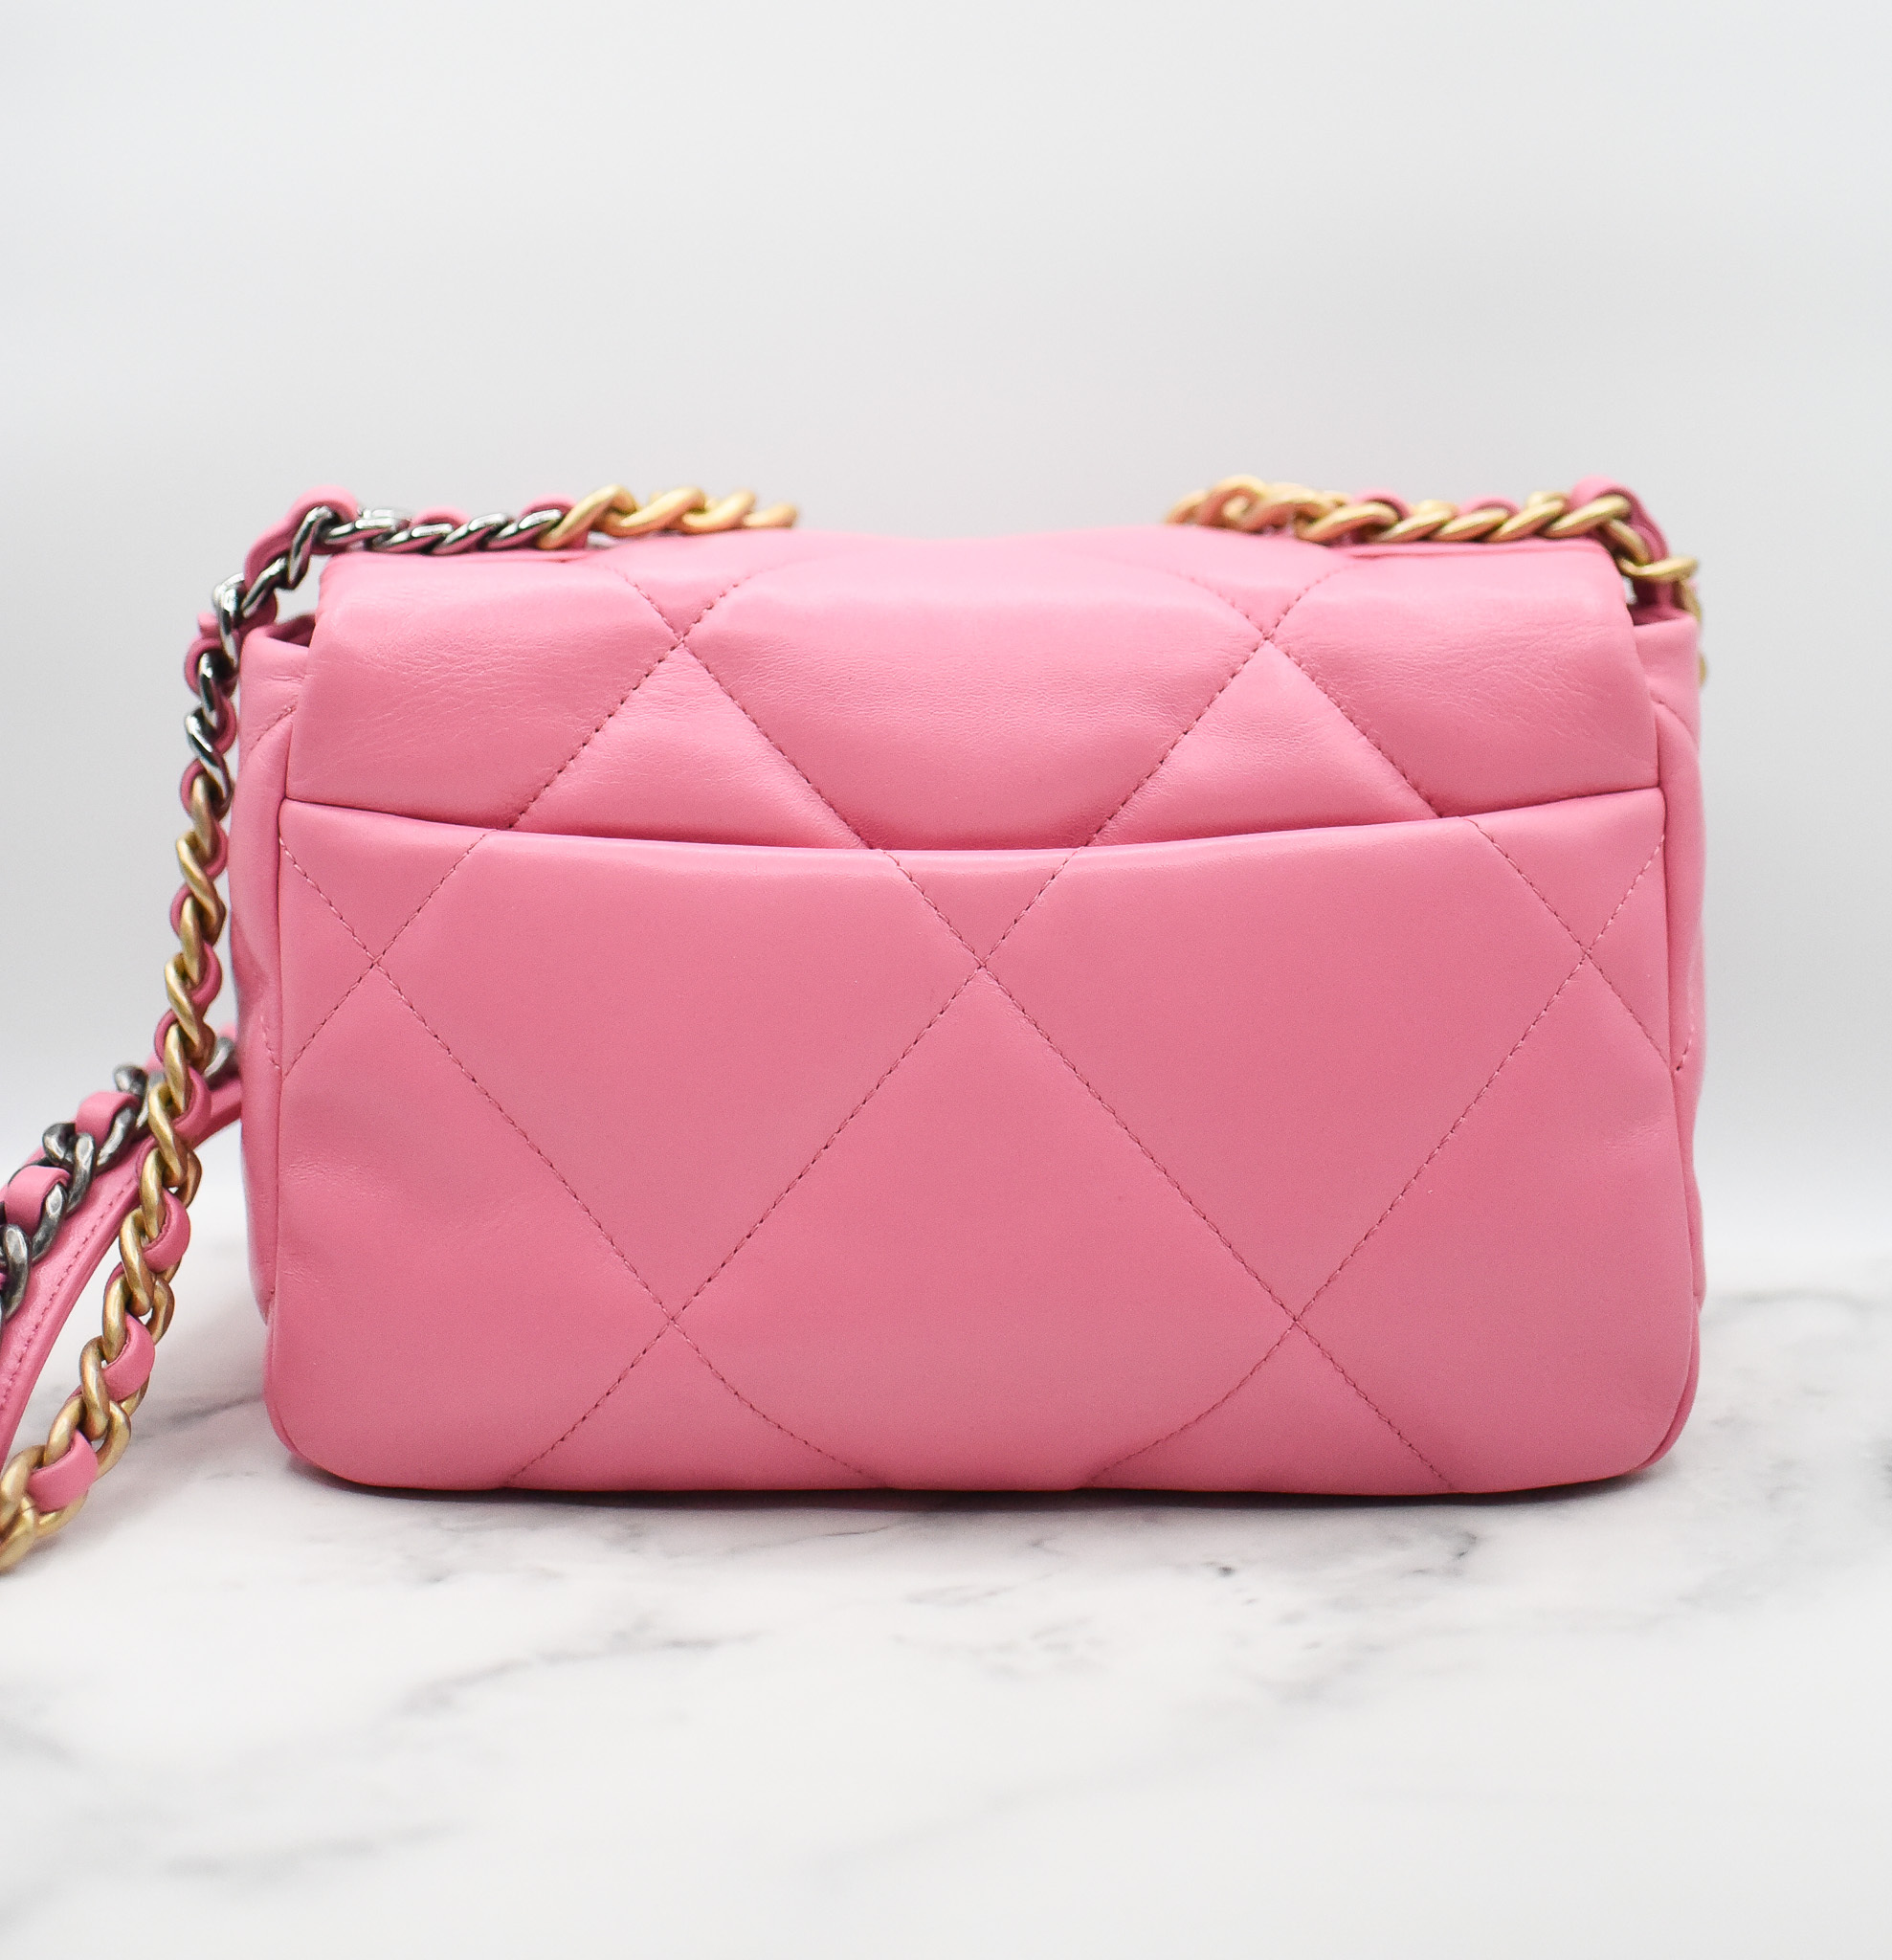 Buying My First Chanel Bag: Covid-19 Edition - The Pink Patola